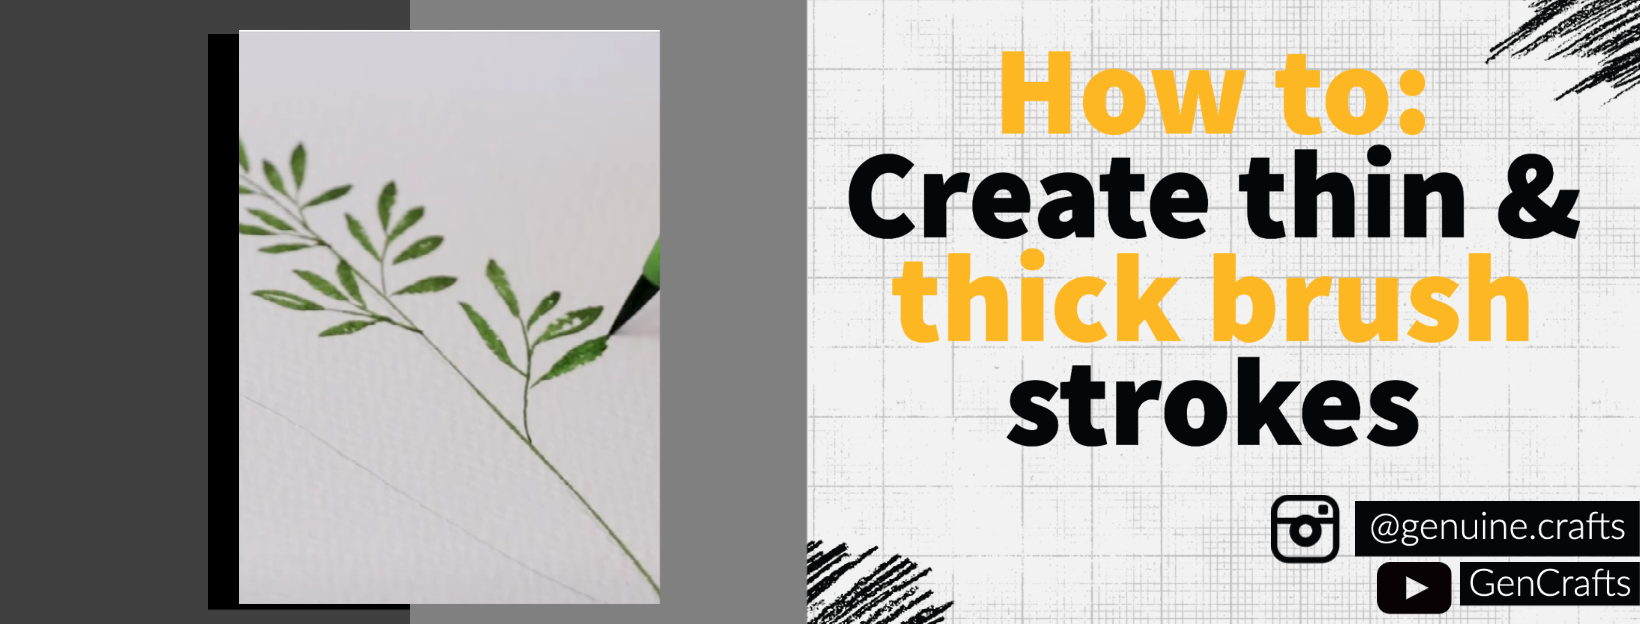 How to: Create thin and thick brush strokes